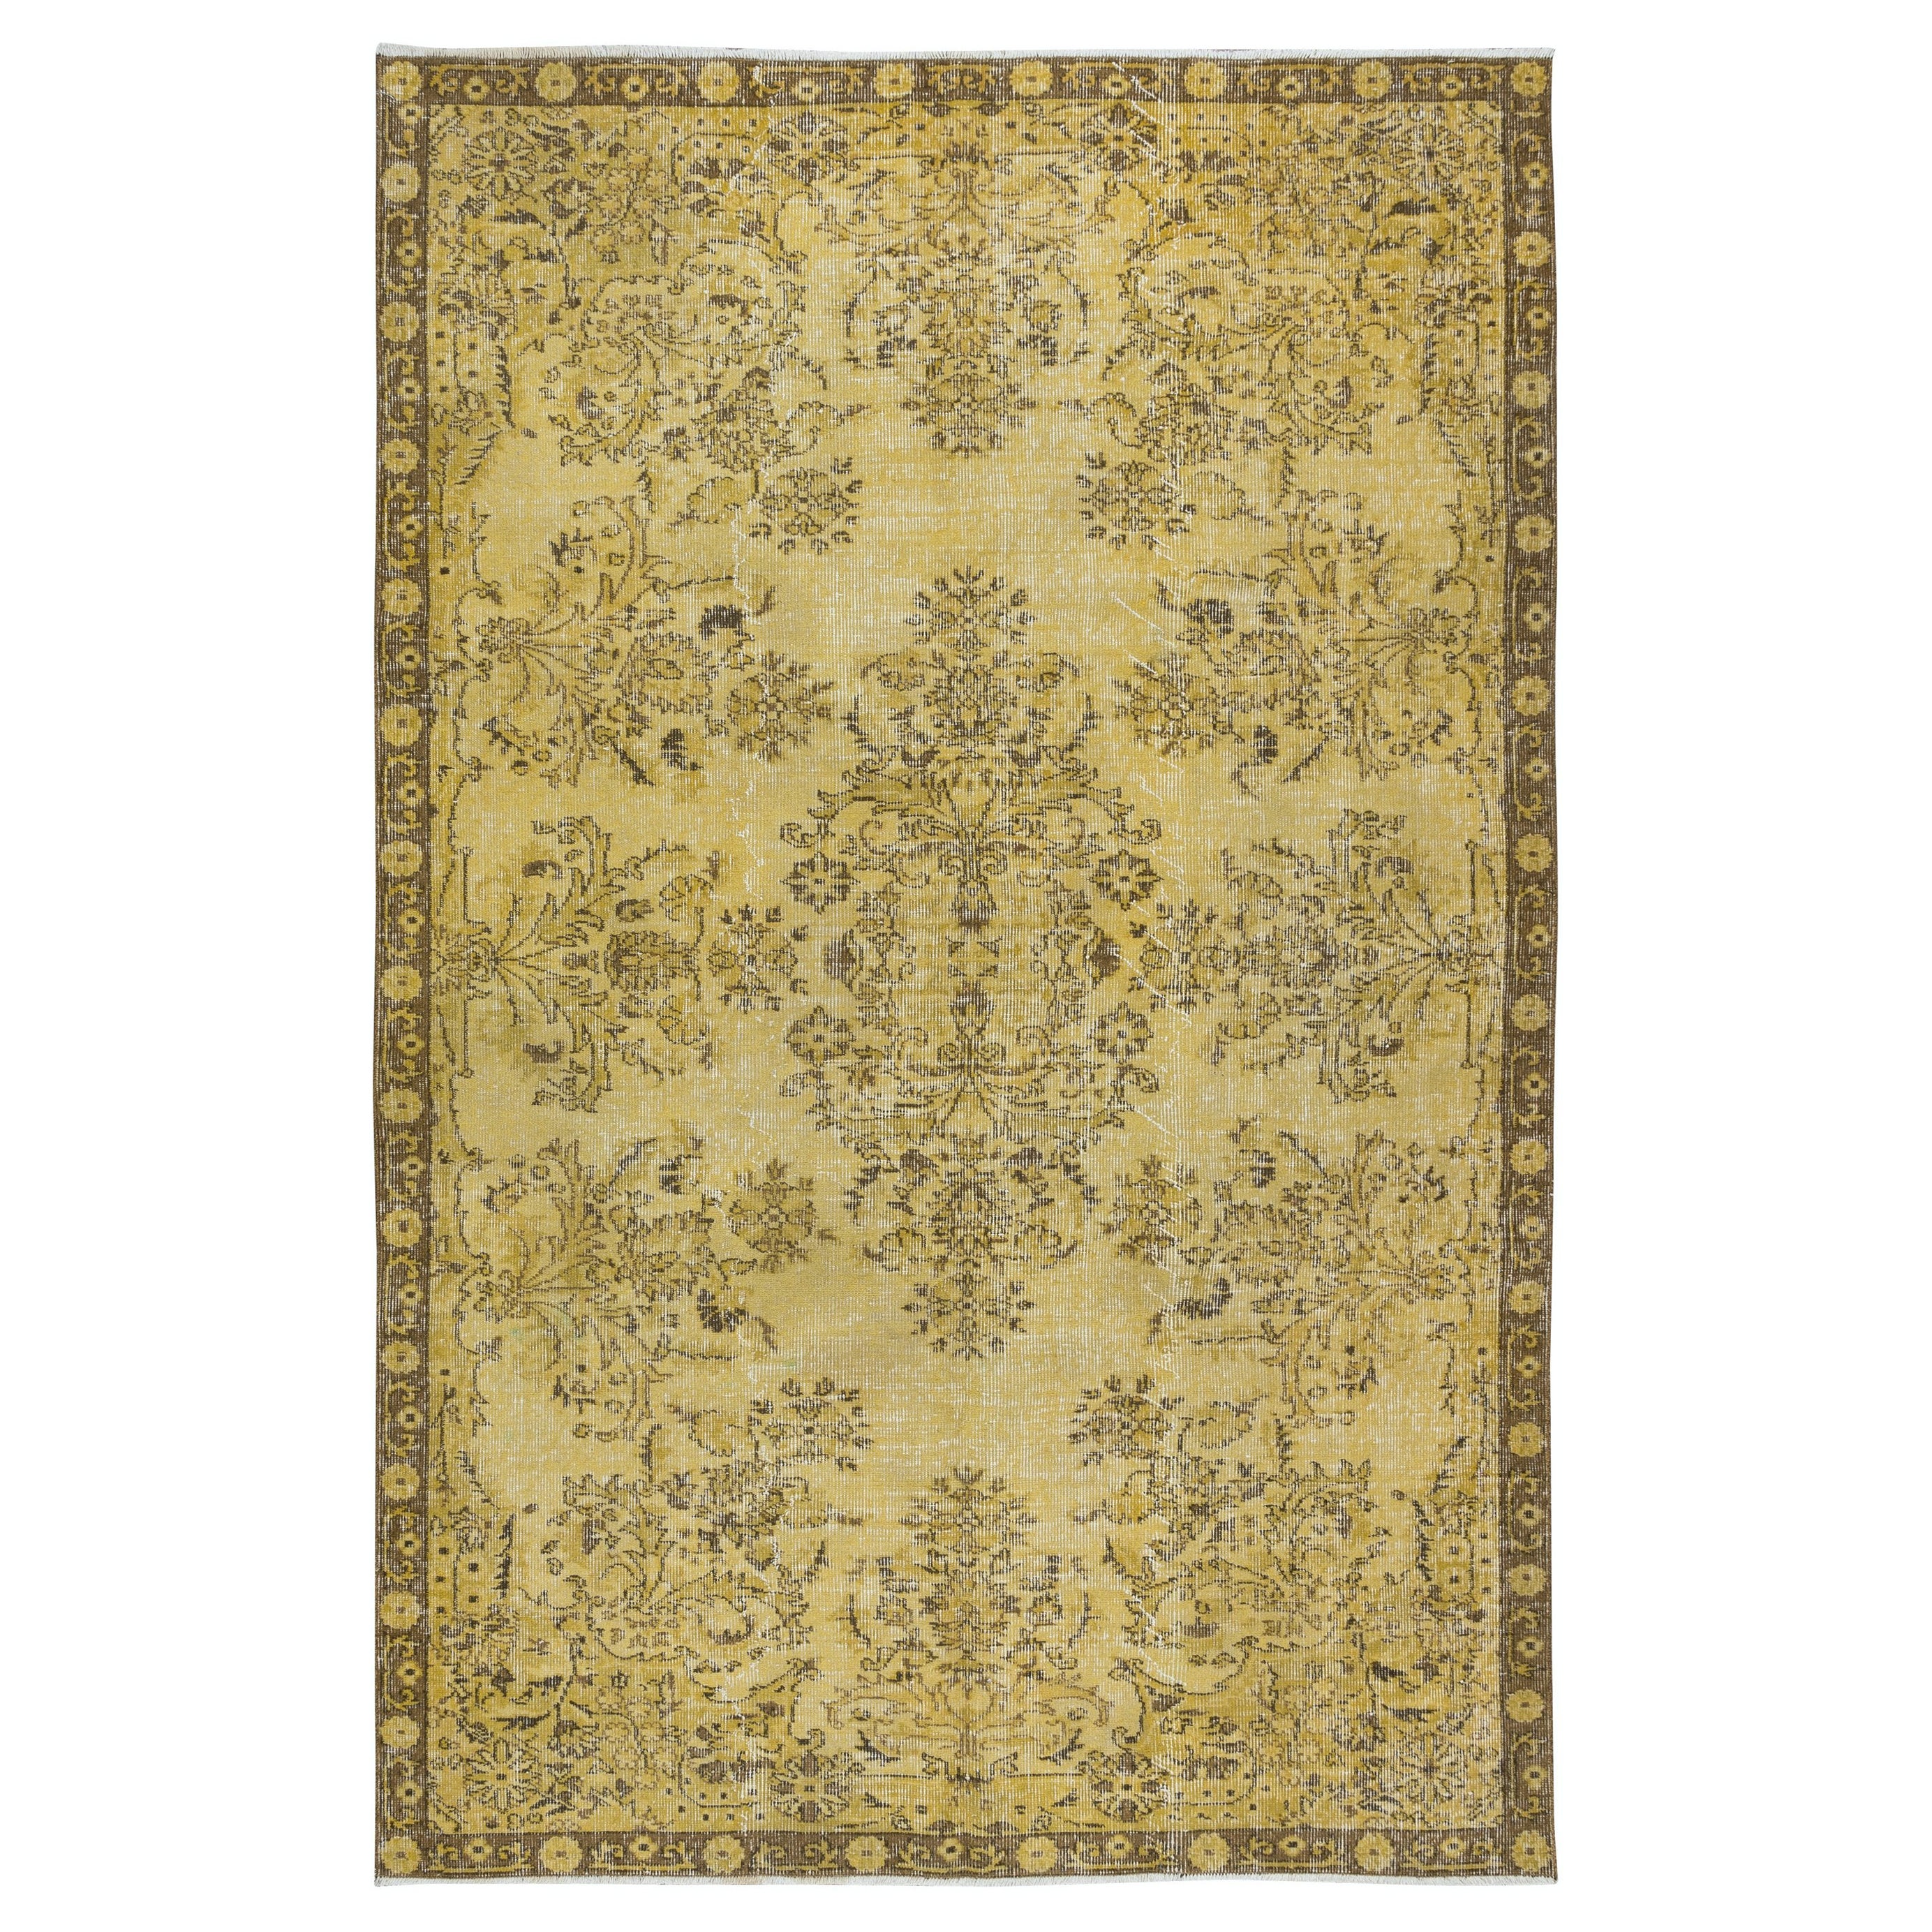 5.7x9.5 Ft Modern Hand Knotted Turkish Wool Area Rug Re-Dyed in Yellow For Sale